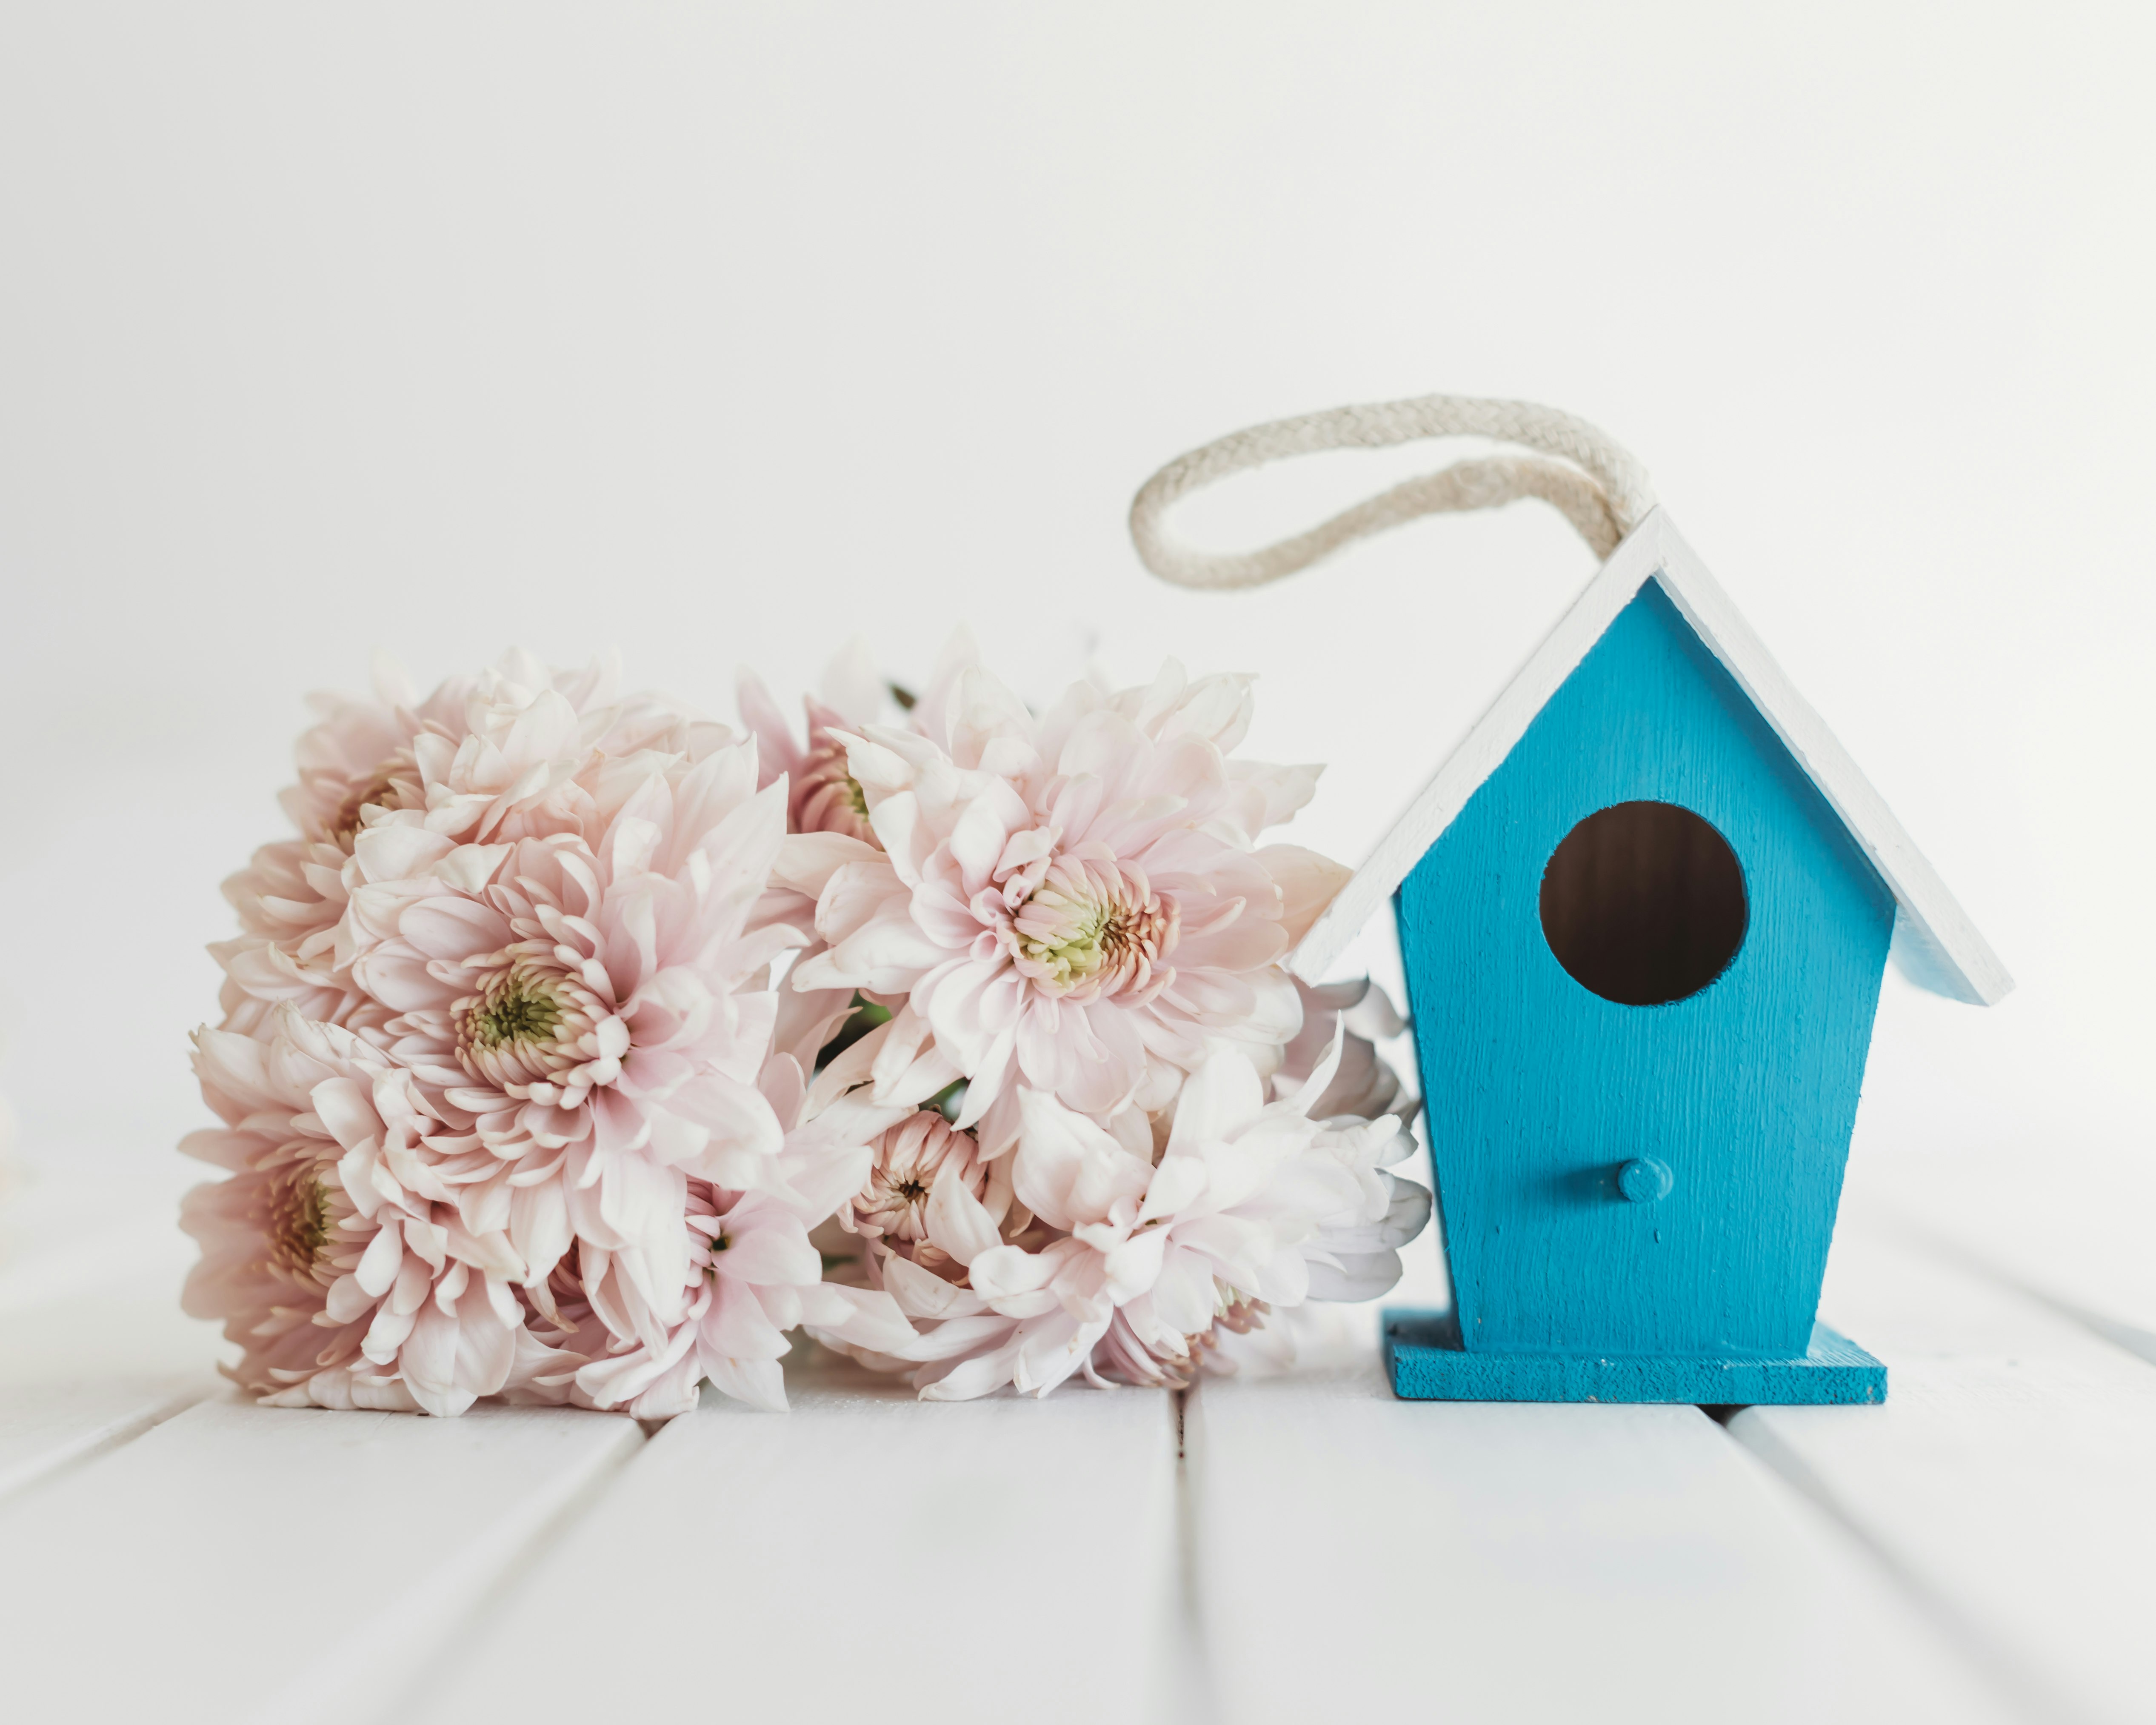 pink and white flowers on blue wooden bird house